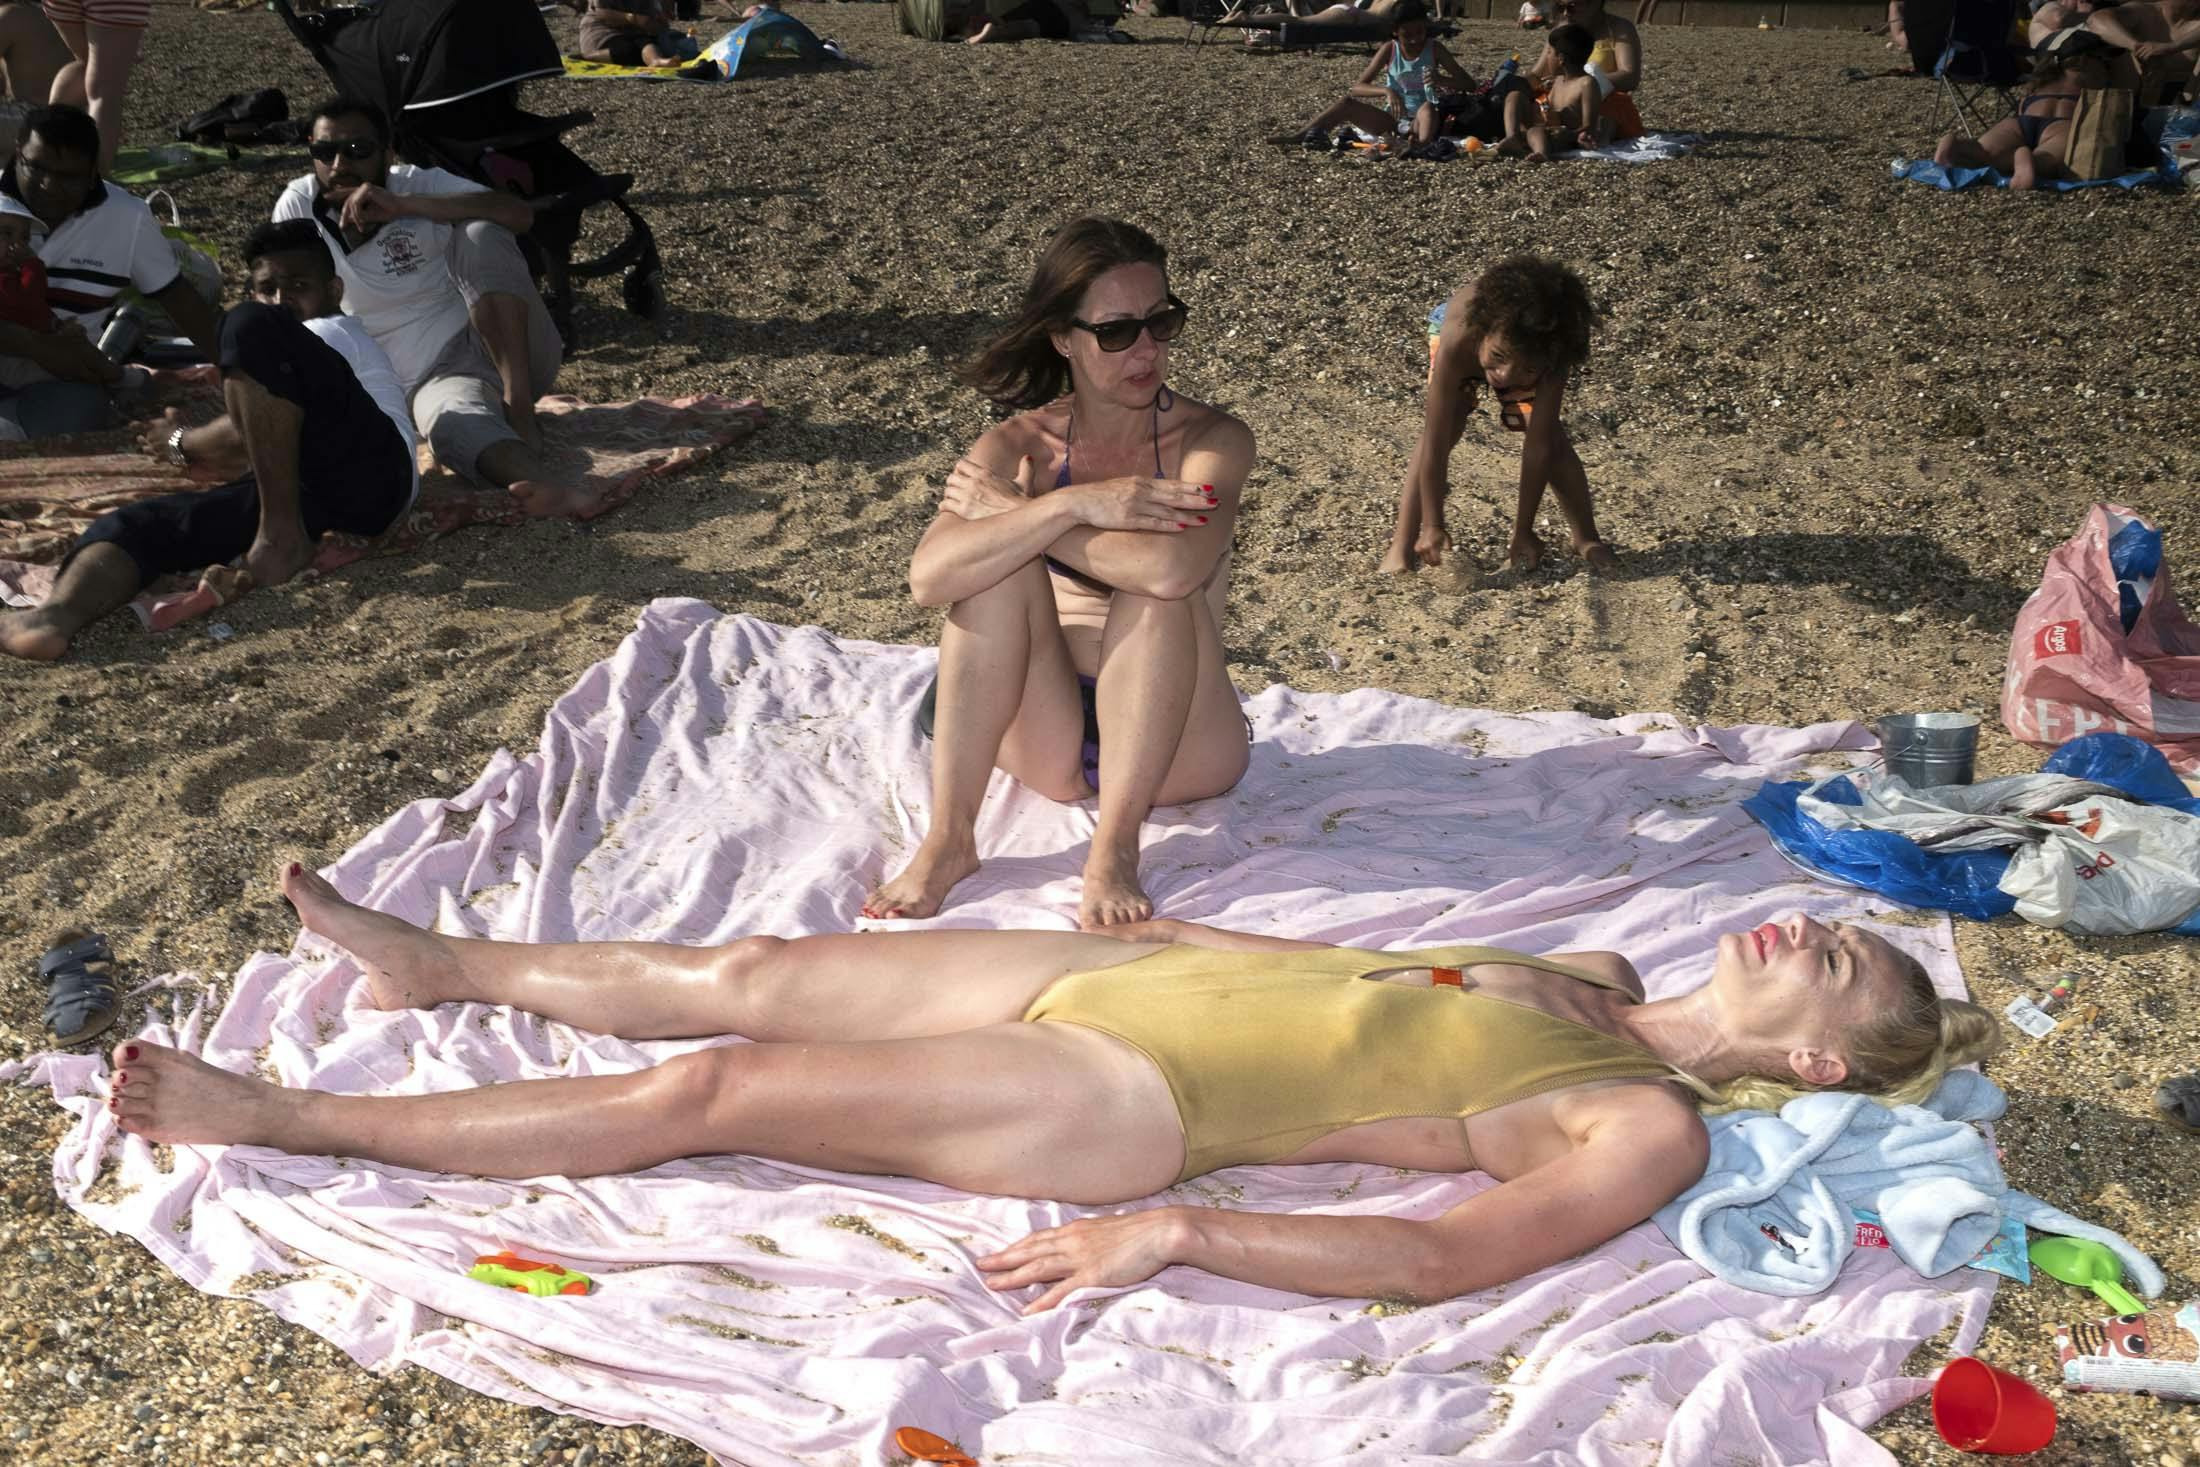 Woman sunbathing with gold swimsuit on pink towel with friend and child